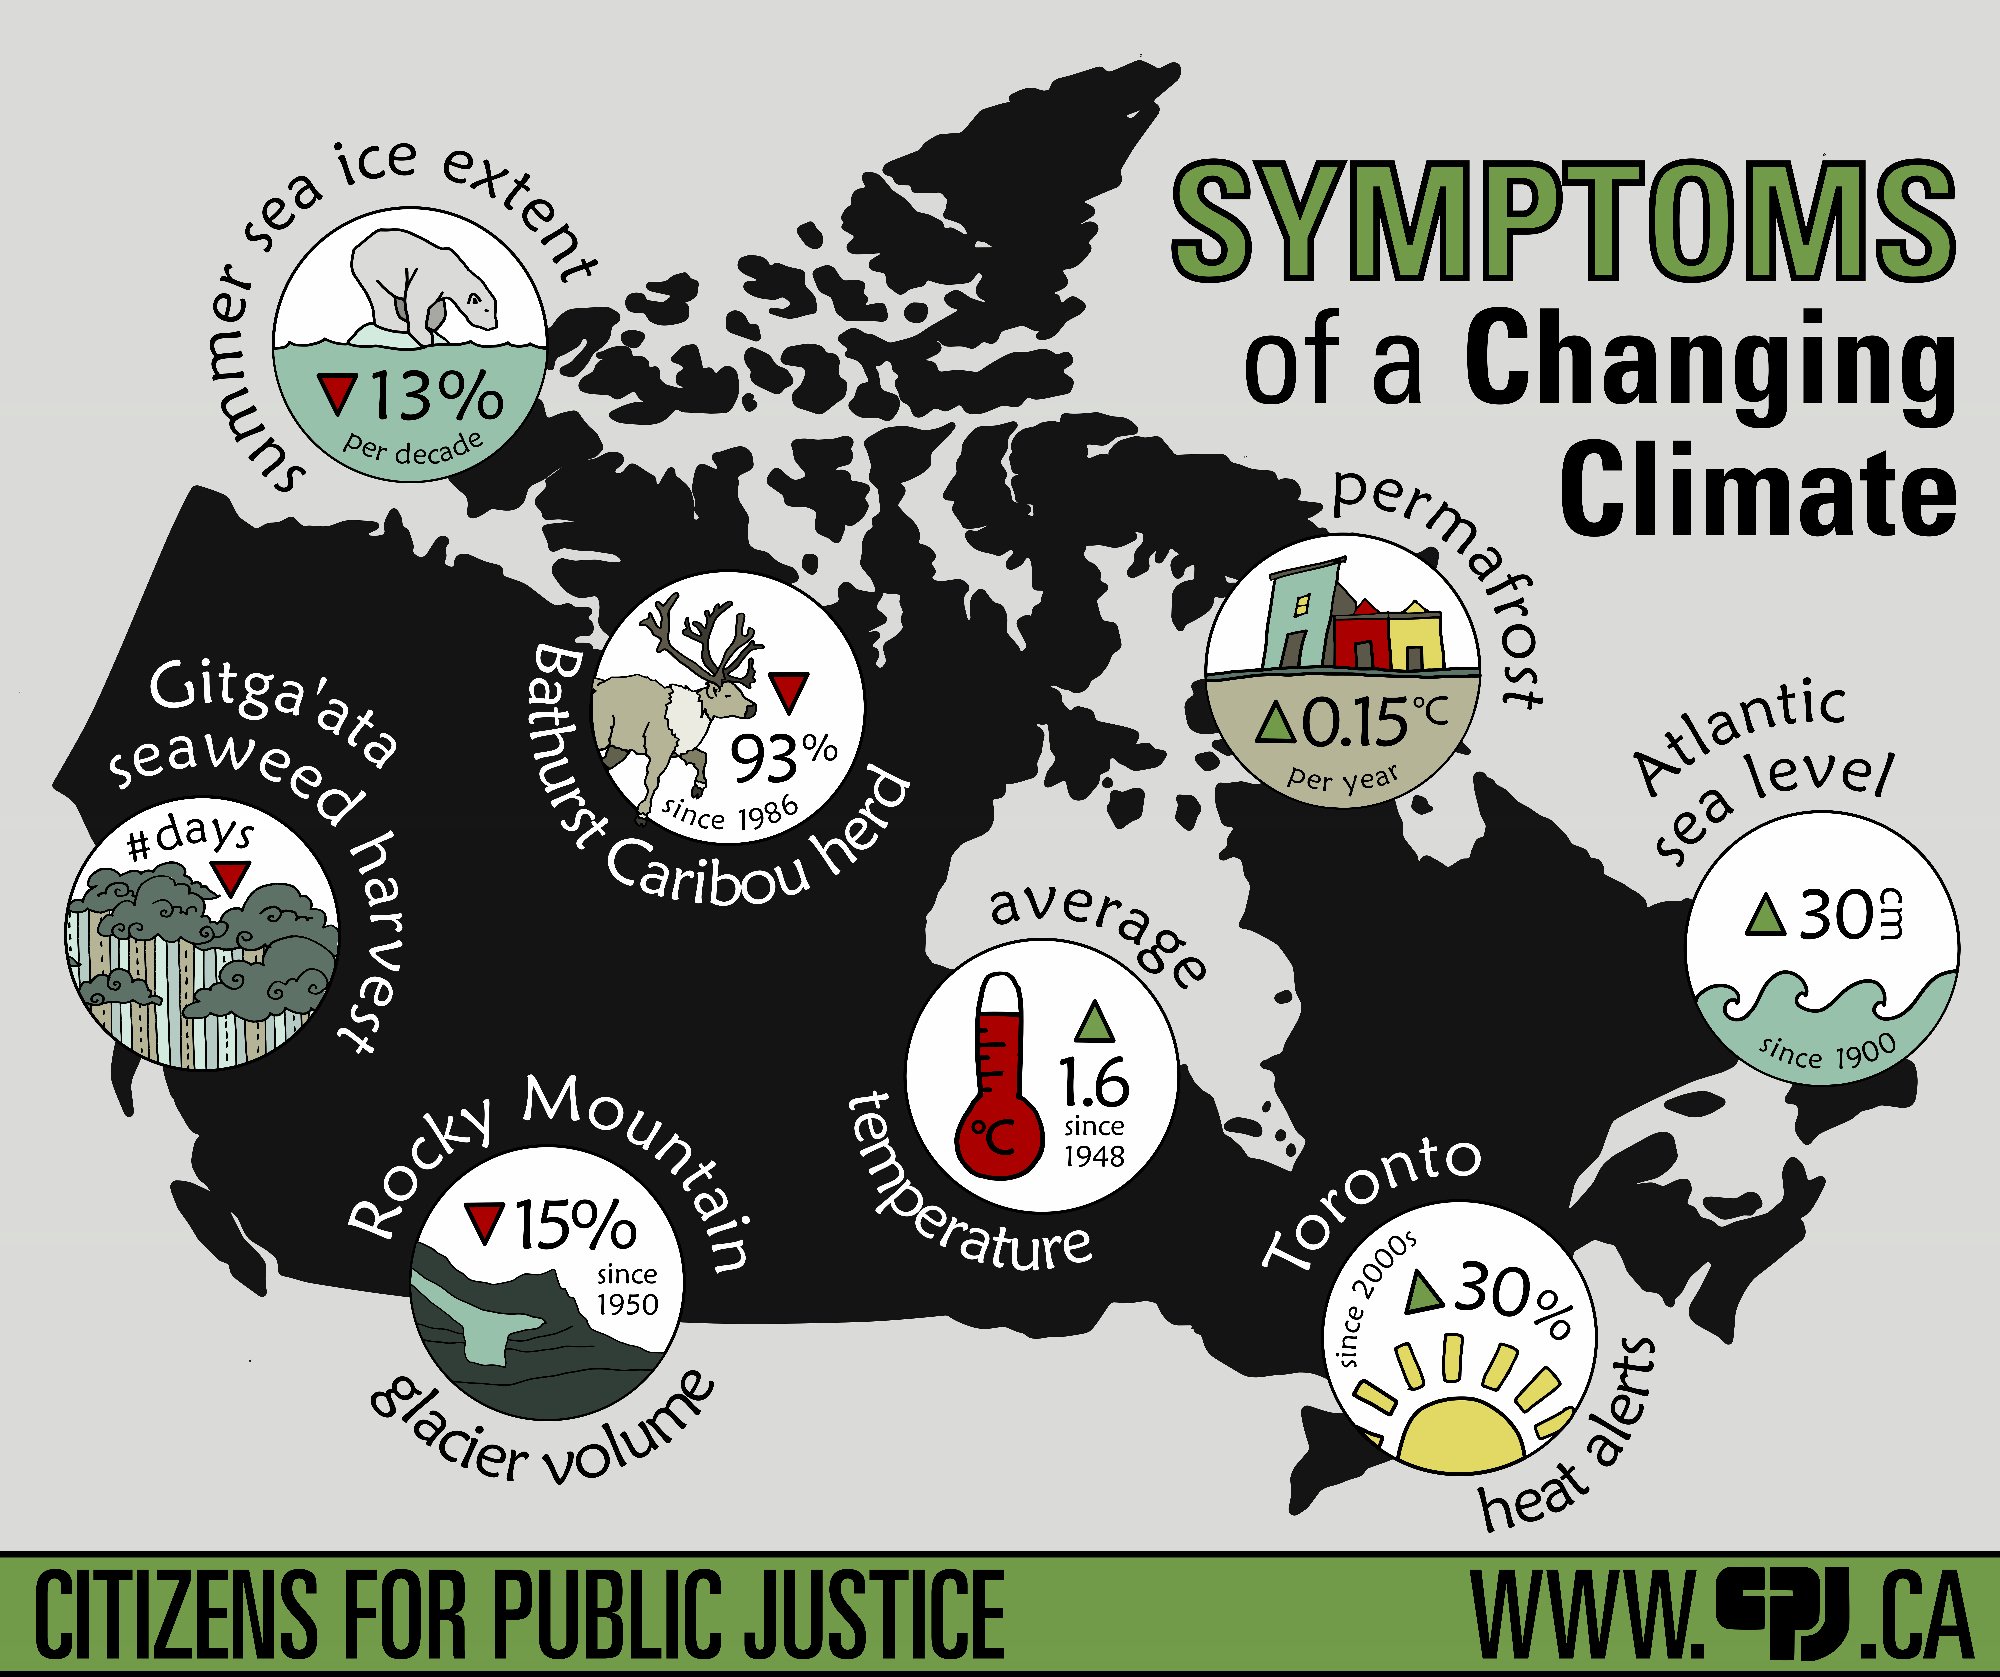 CPJ on Twitter: "Infographic: 8 Impacts of Climate Change in Canada #